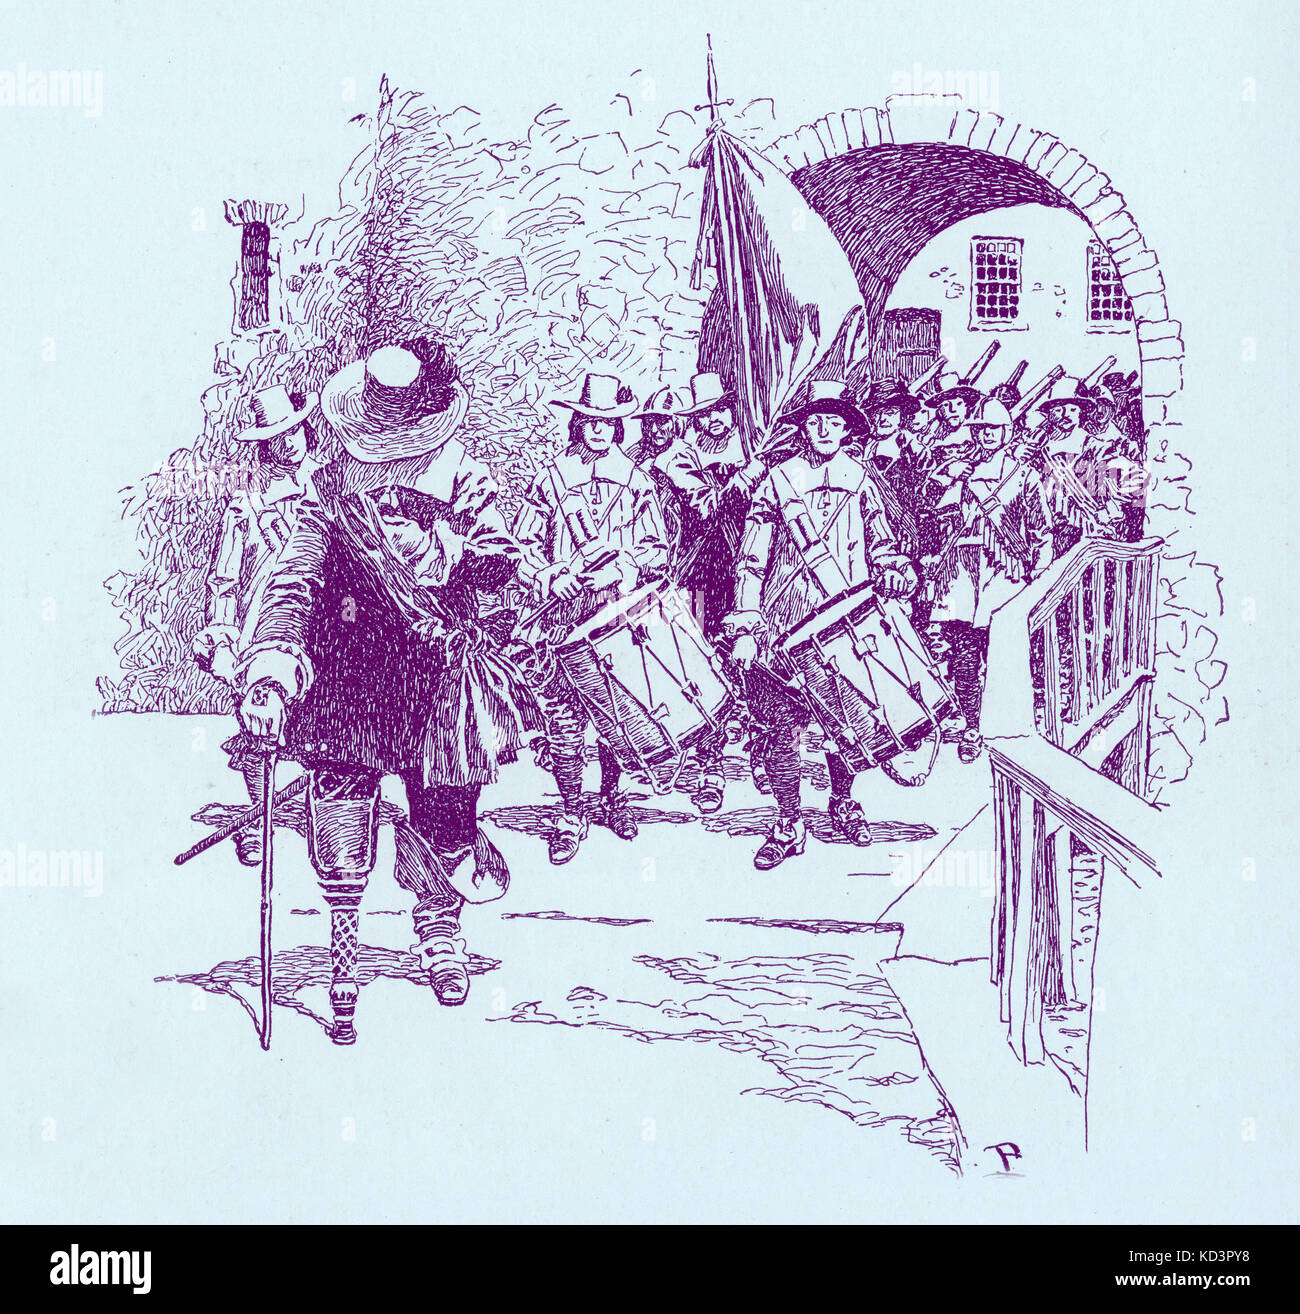 Peter Stuyvesant, last Dutch governor of New York (then New Amsterdam), surrenders Fort Amsterdam to the British, 1664. Illustration by Howard Pyle, 1883 Stock Photo